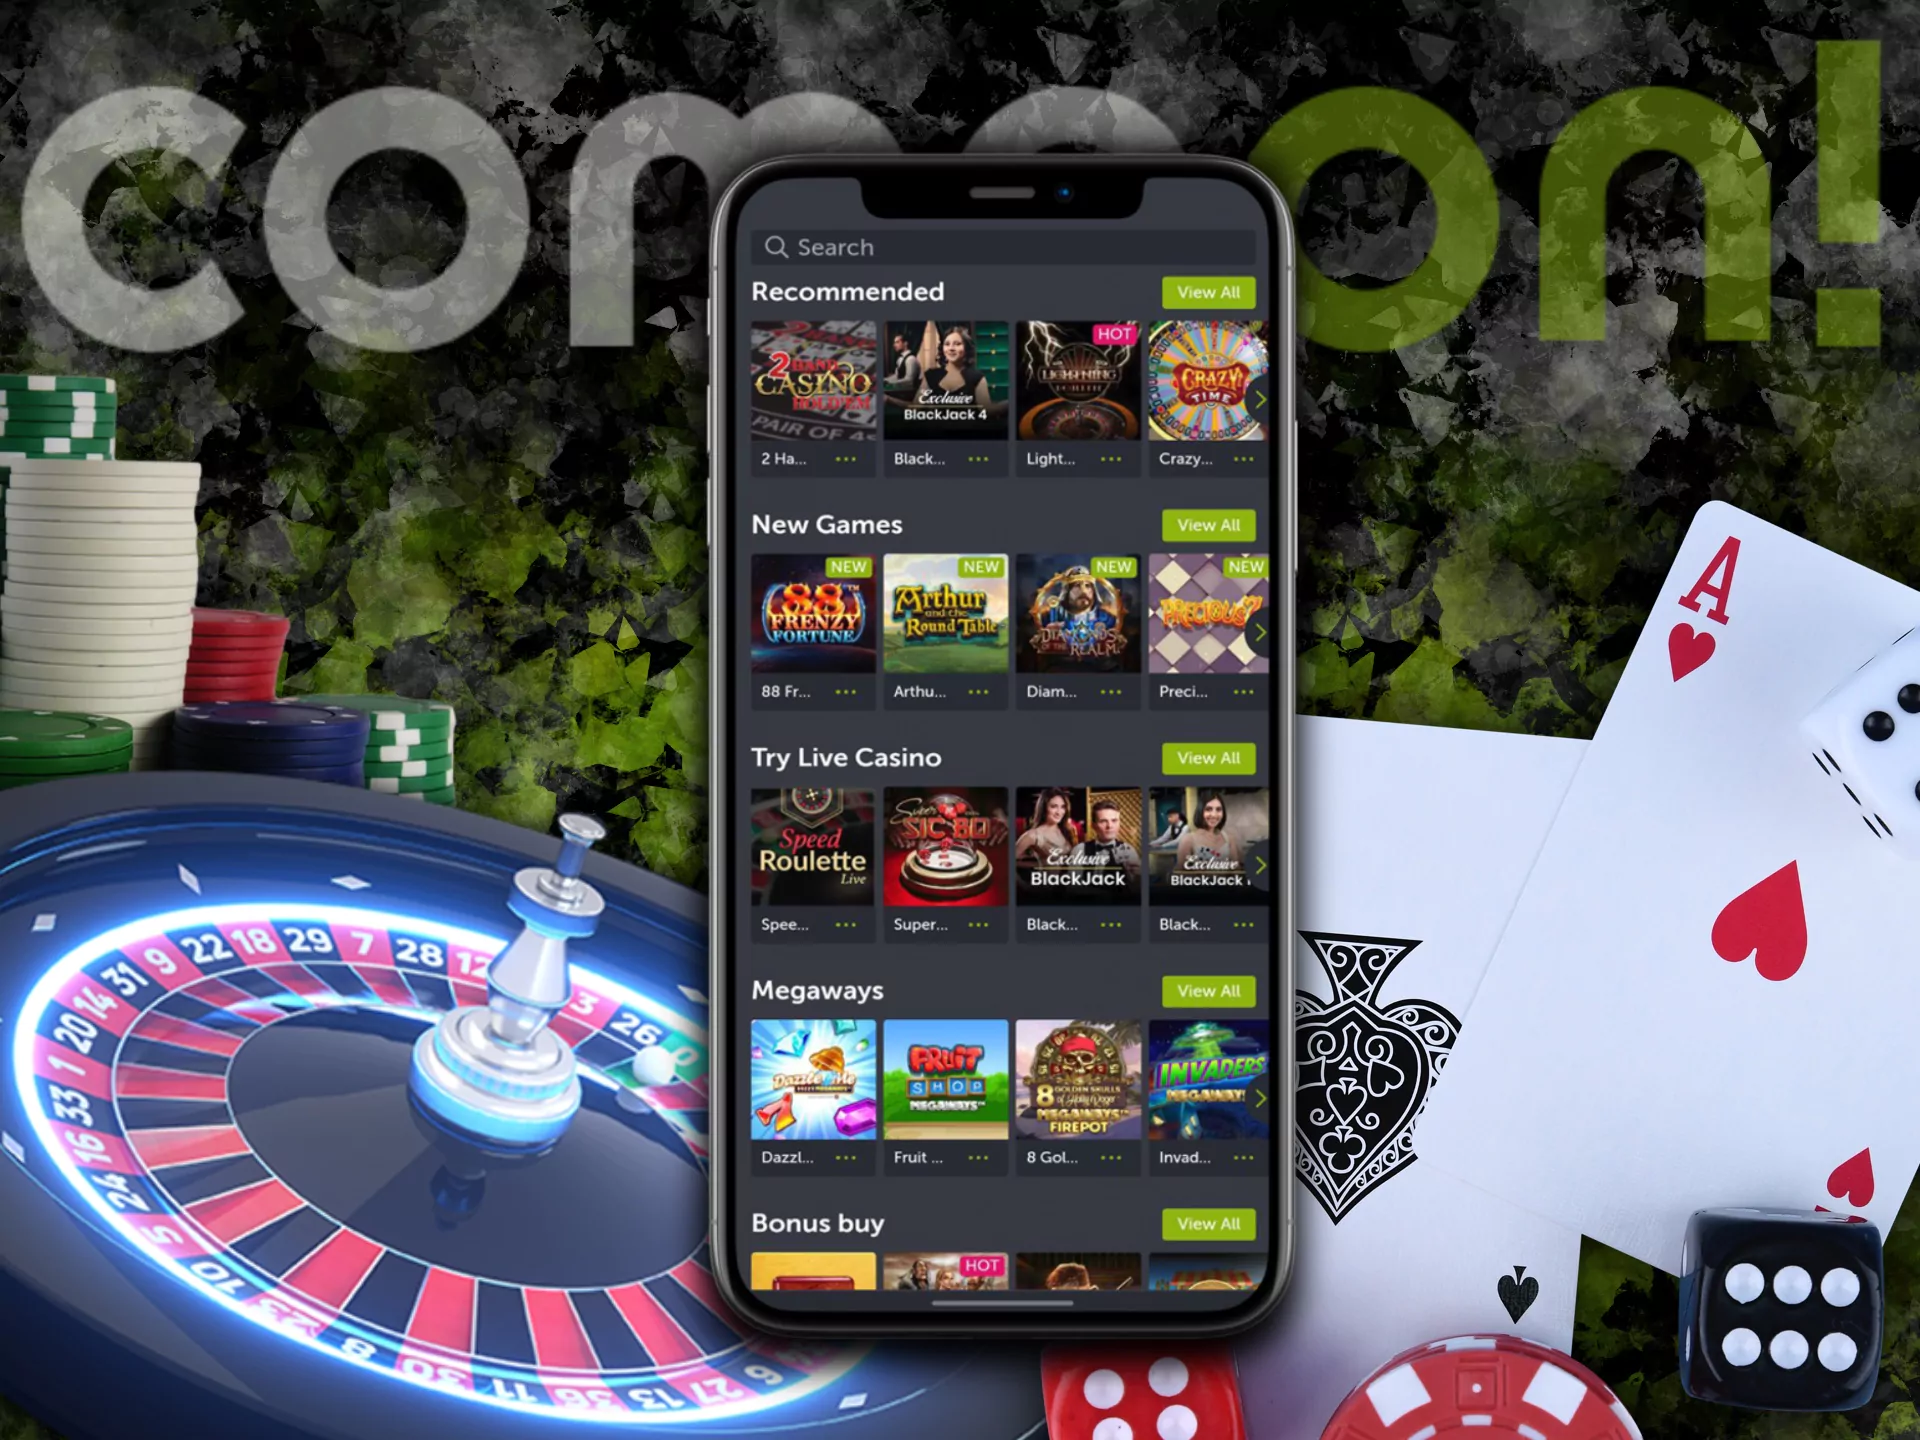 The casino is located in the special section on the site and in the app.